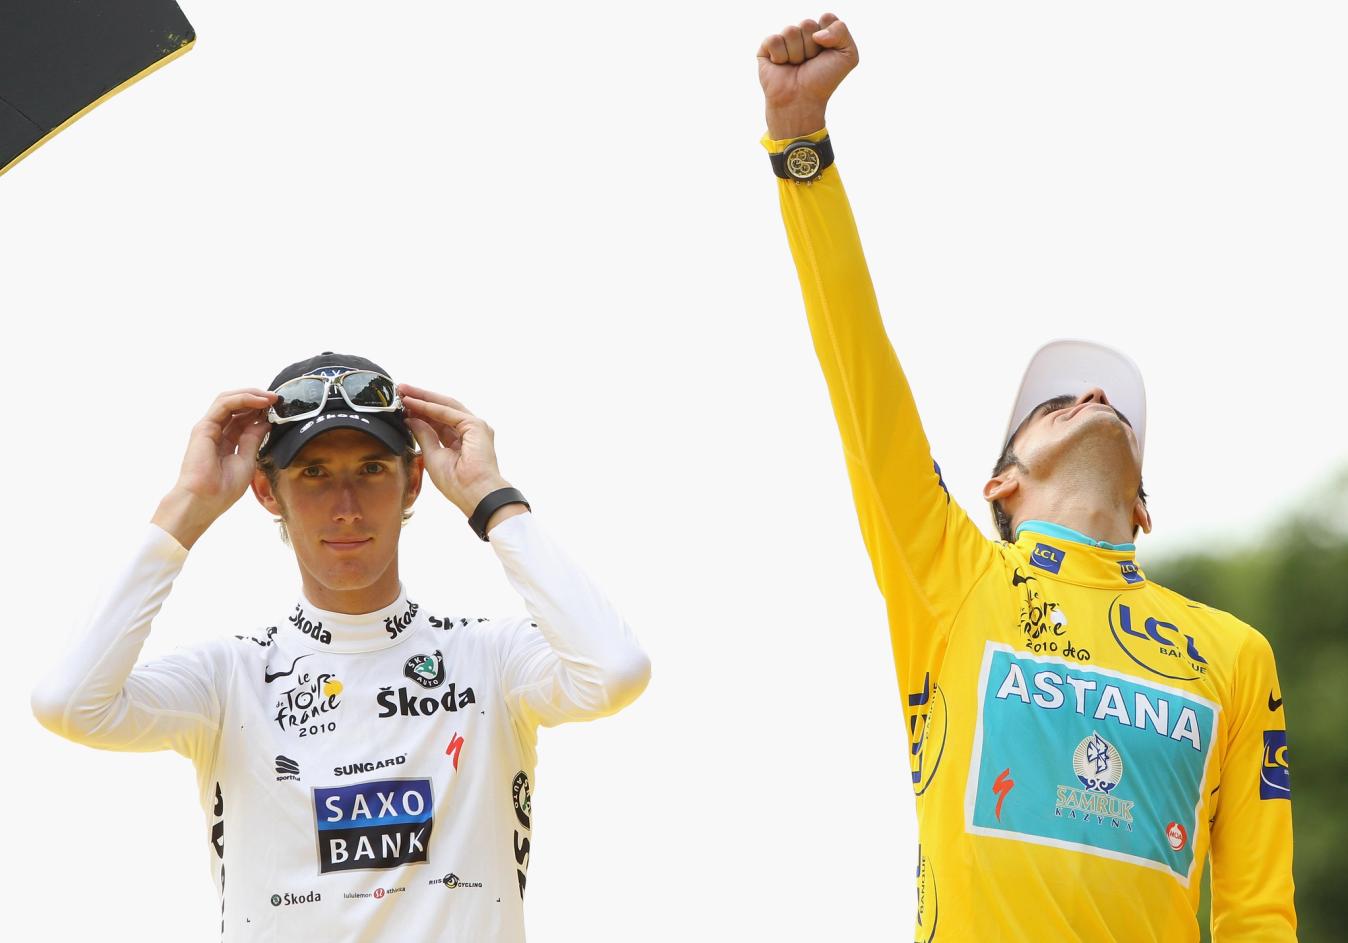 Contador and Schleck on the final podium in Paris. While two never ran back the showdown in the same ferocity of 2010, the next year was once again a race to remember in part due to their tenacity 